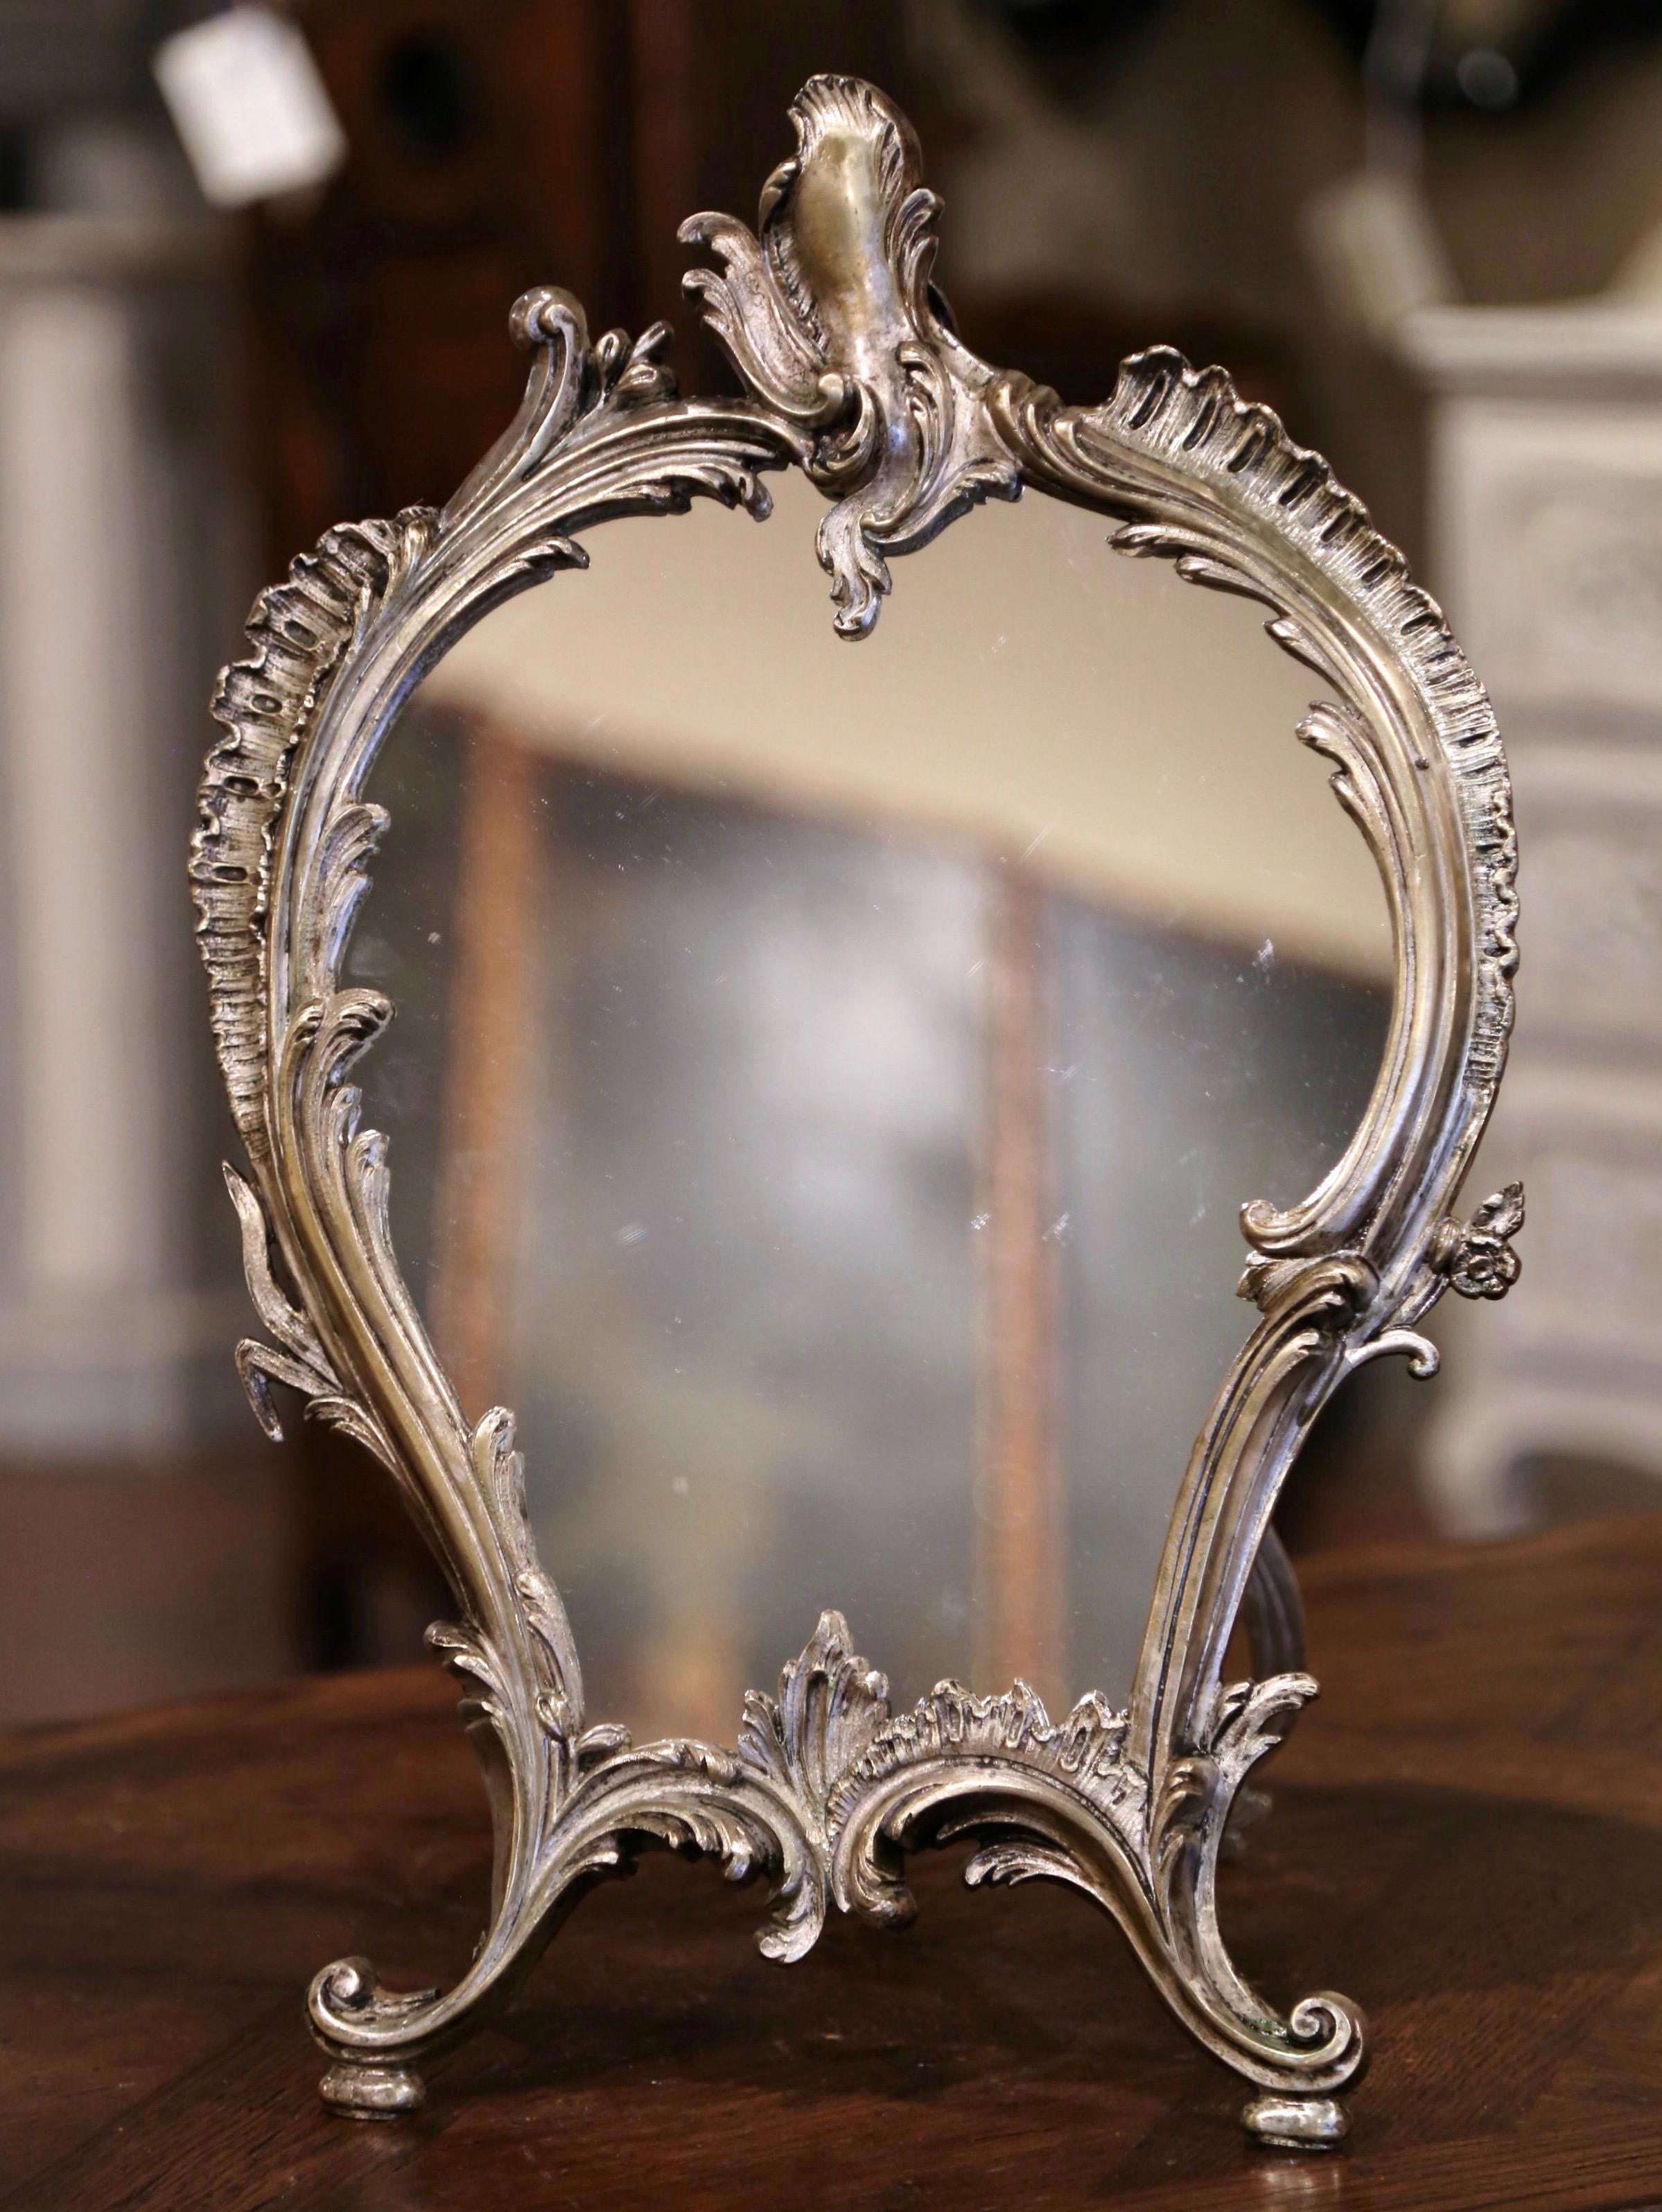 Decorate your master bath counter with this elegant antique dressing mirror. Crafted in France, circa 1870, the bronze table mirror features a centered ornate cartouche, embellished by scrolled floral and leaf decor on both sides, and resting on an